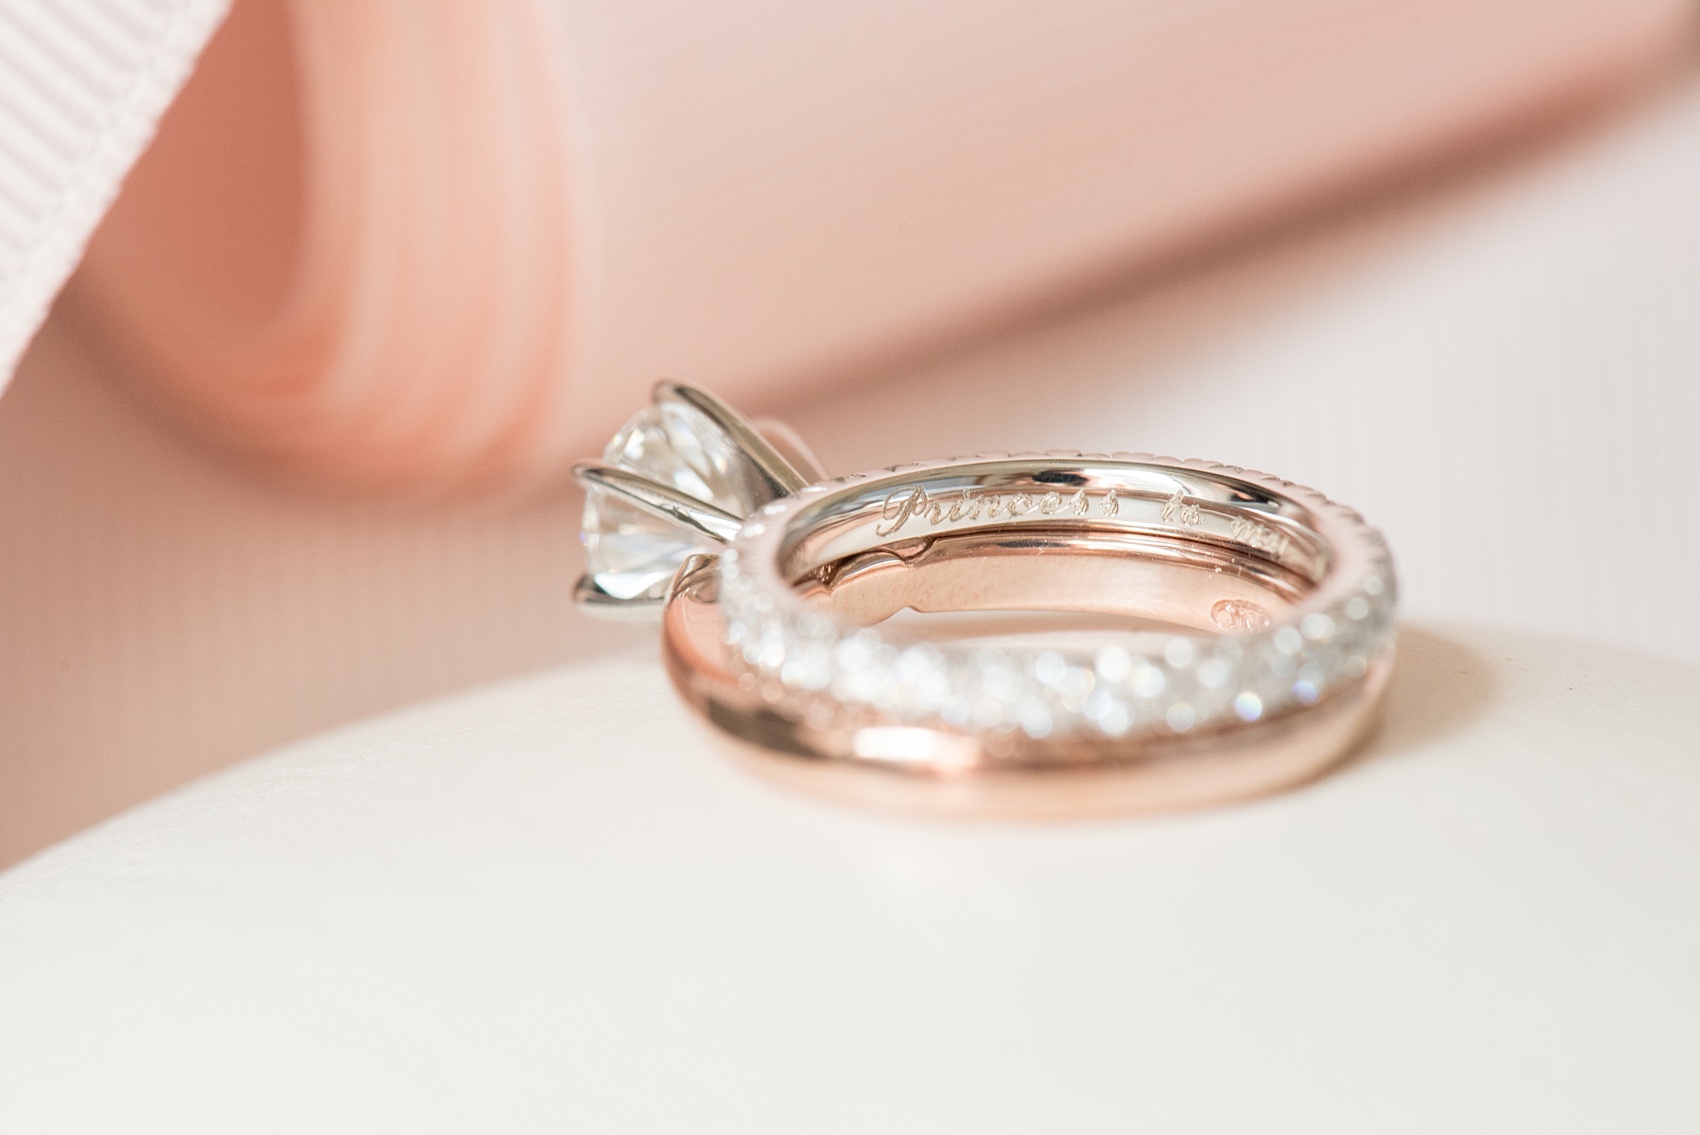 Mikkel Paige Photography photos of a luxury wedding in NYC. Ring detail image with "Princess" engraved inside the bride's diamond eternity band.